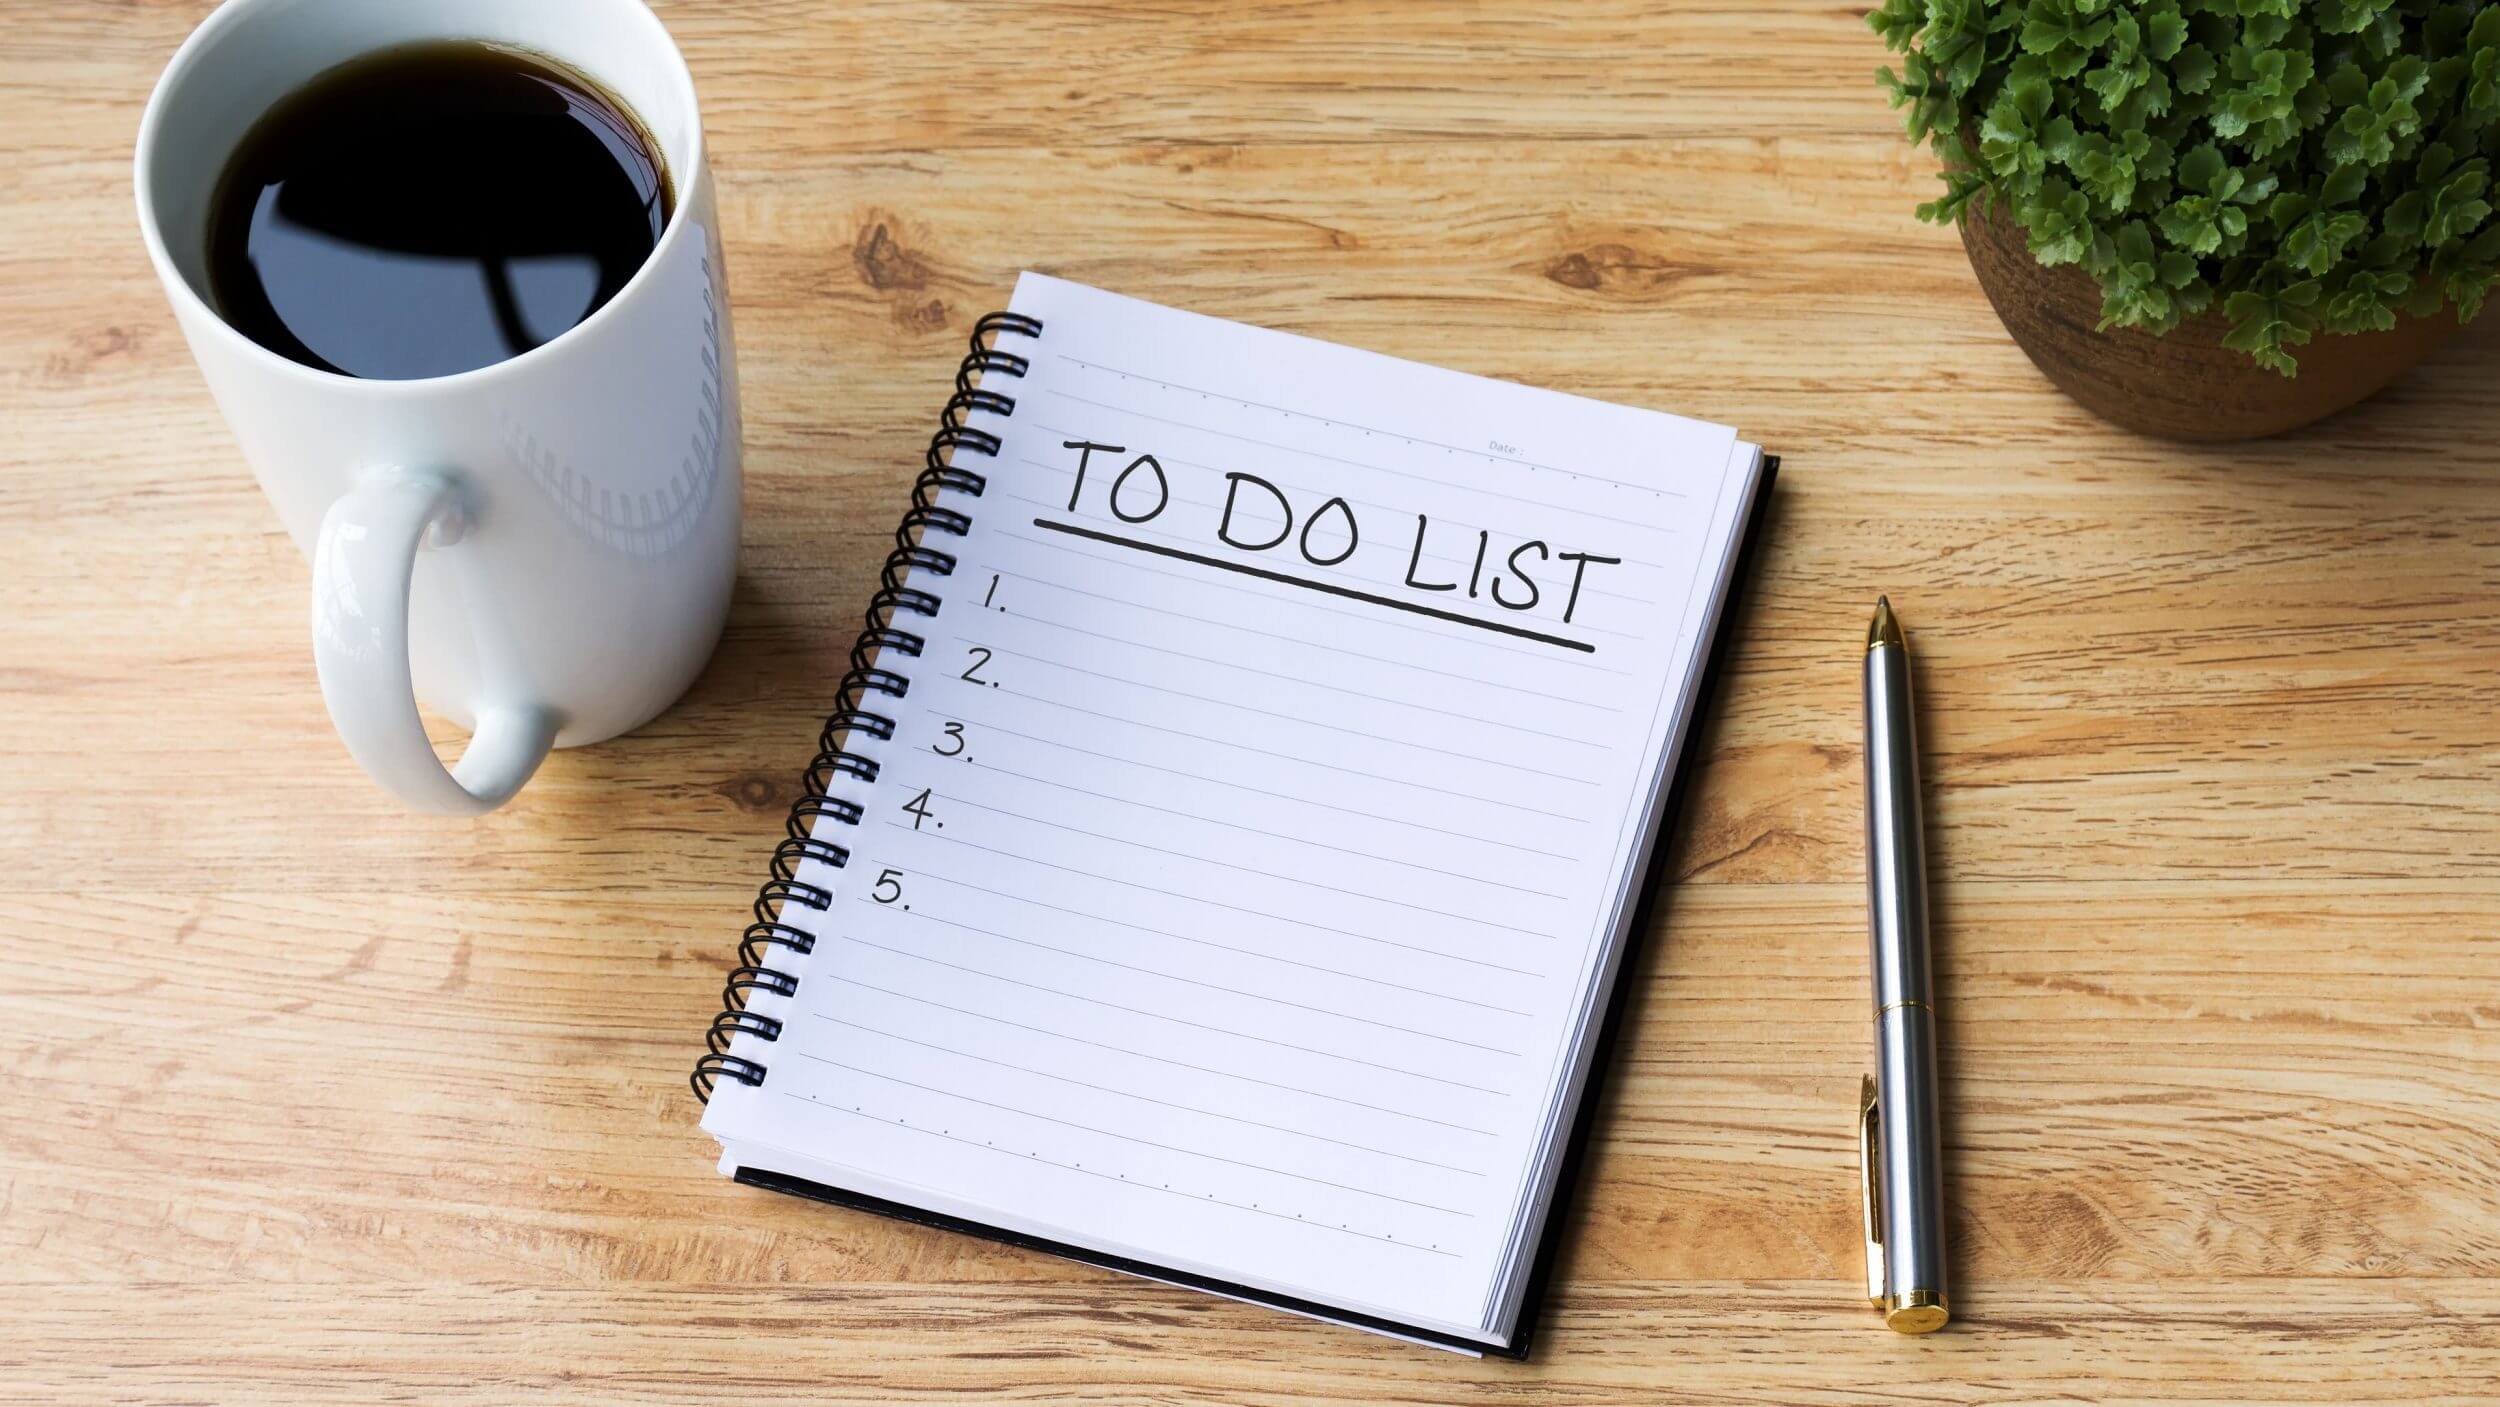 Setting a to do list with the next steps helps groups stay organised and on track.